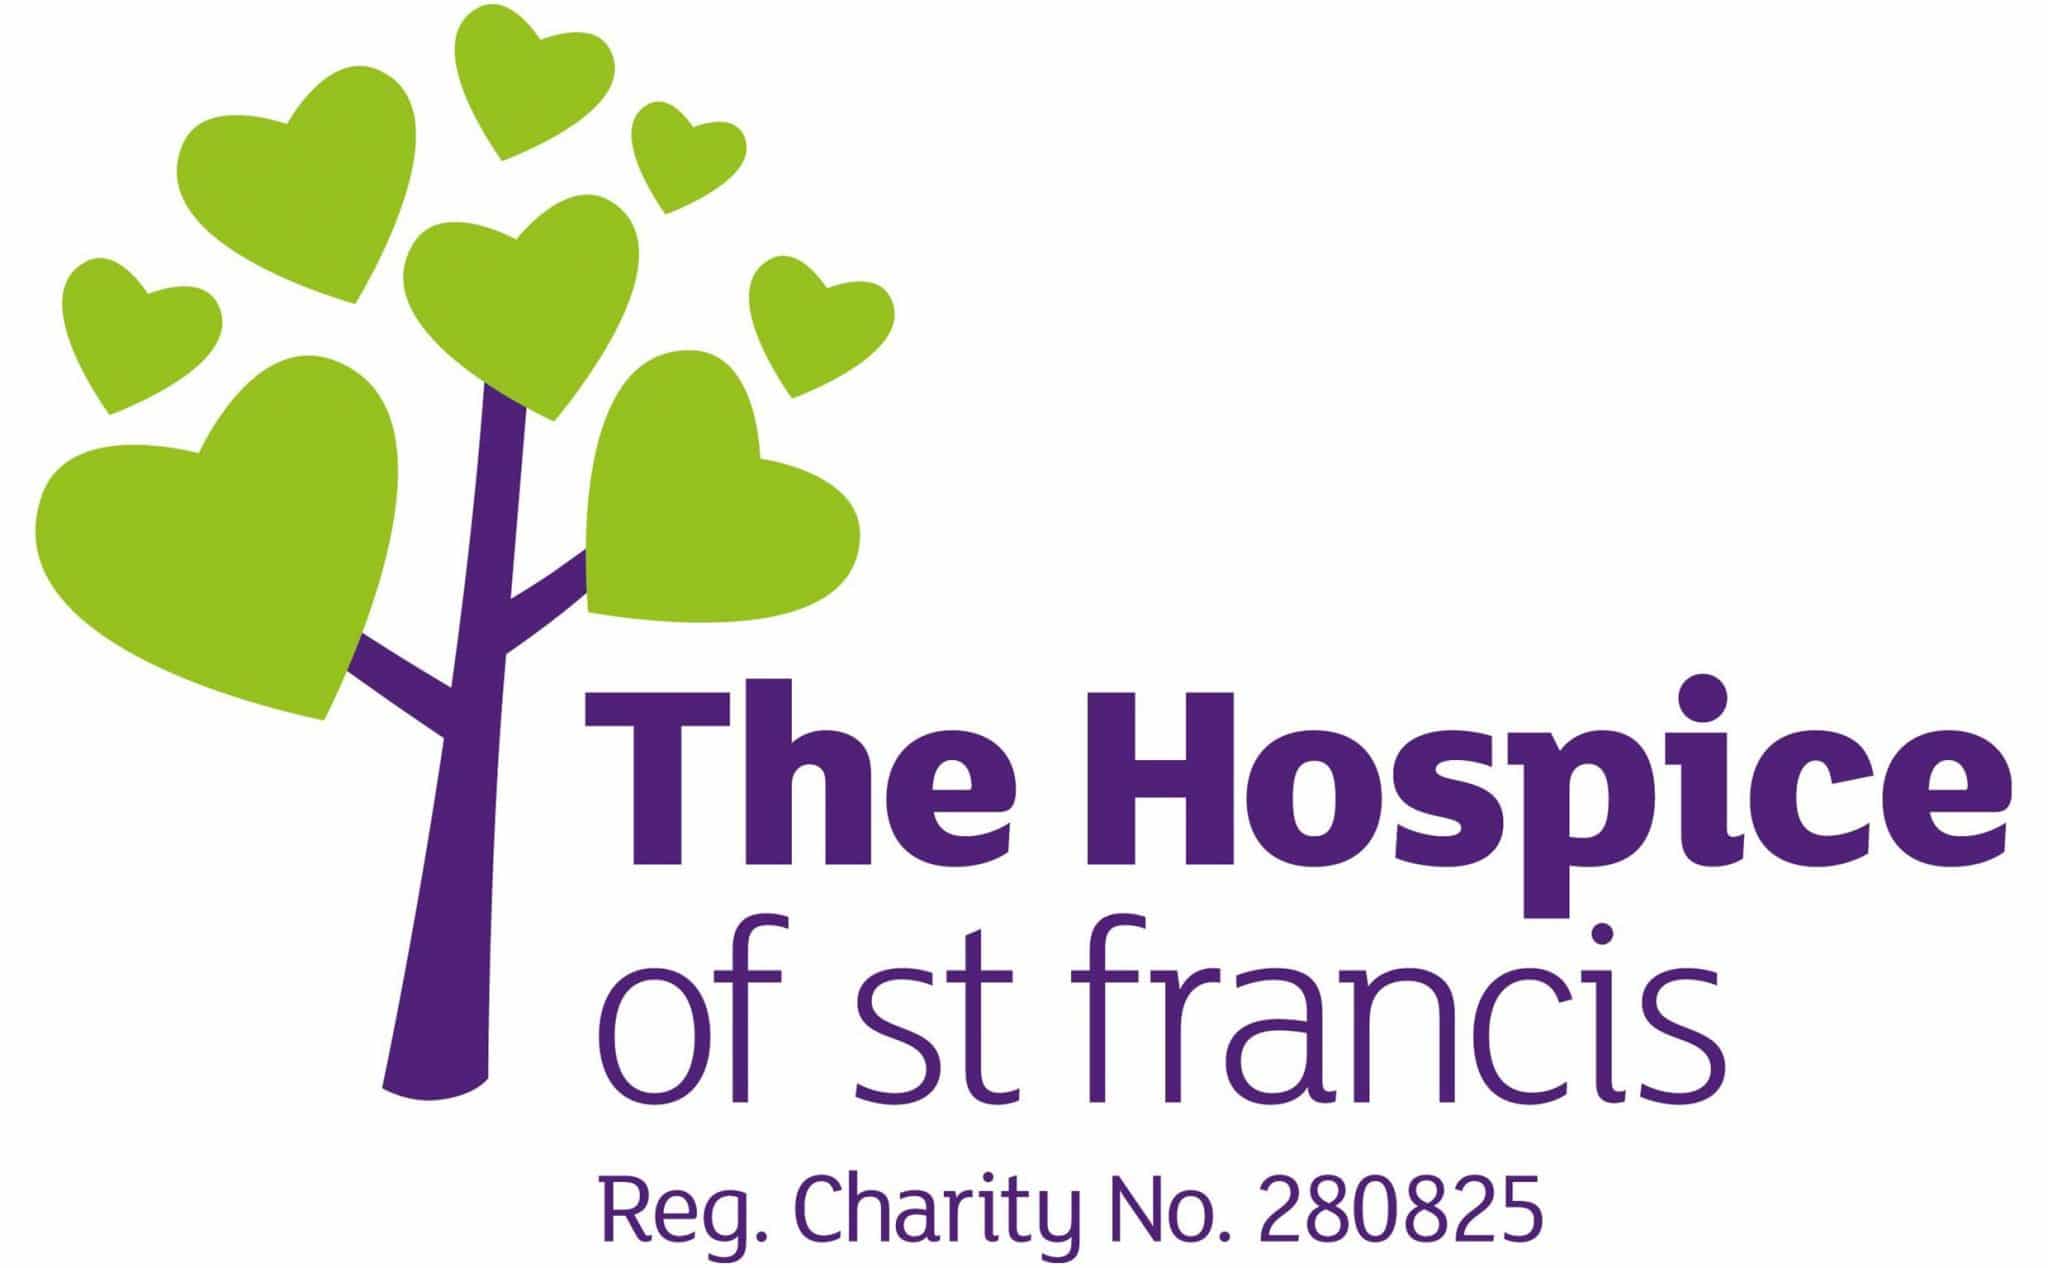 The Hospice of st francis